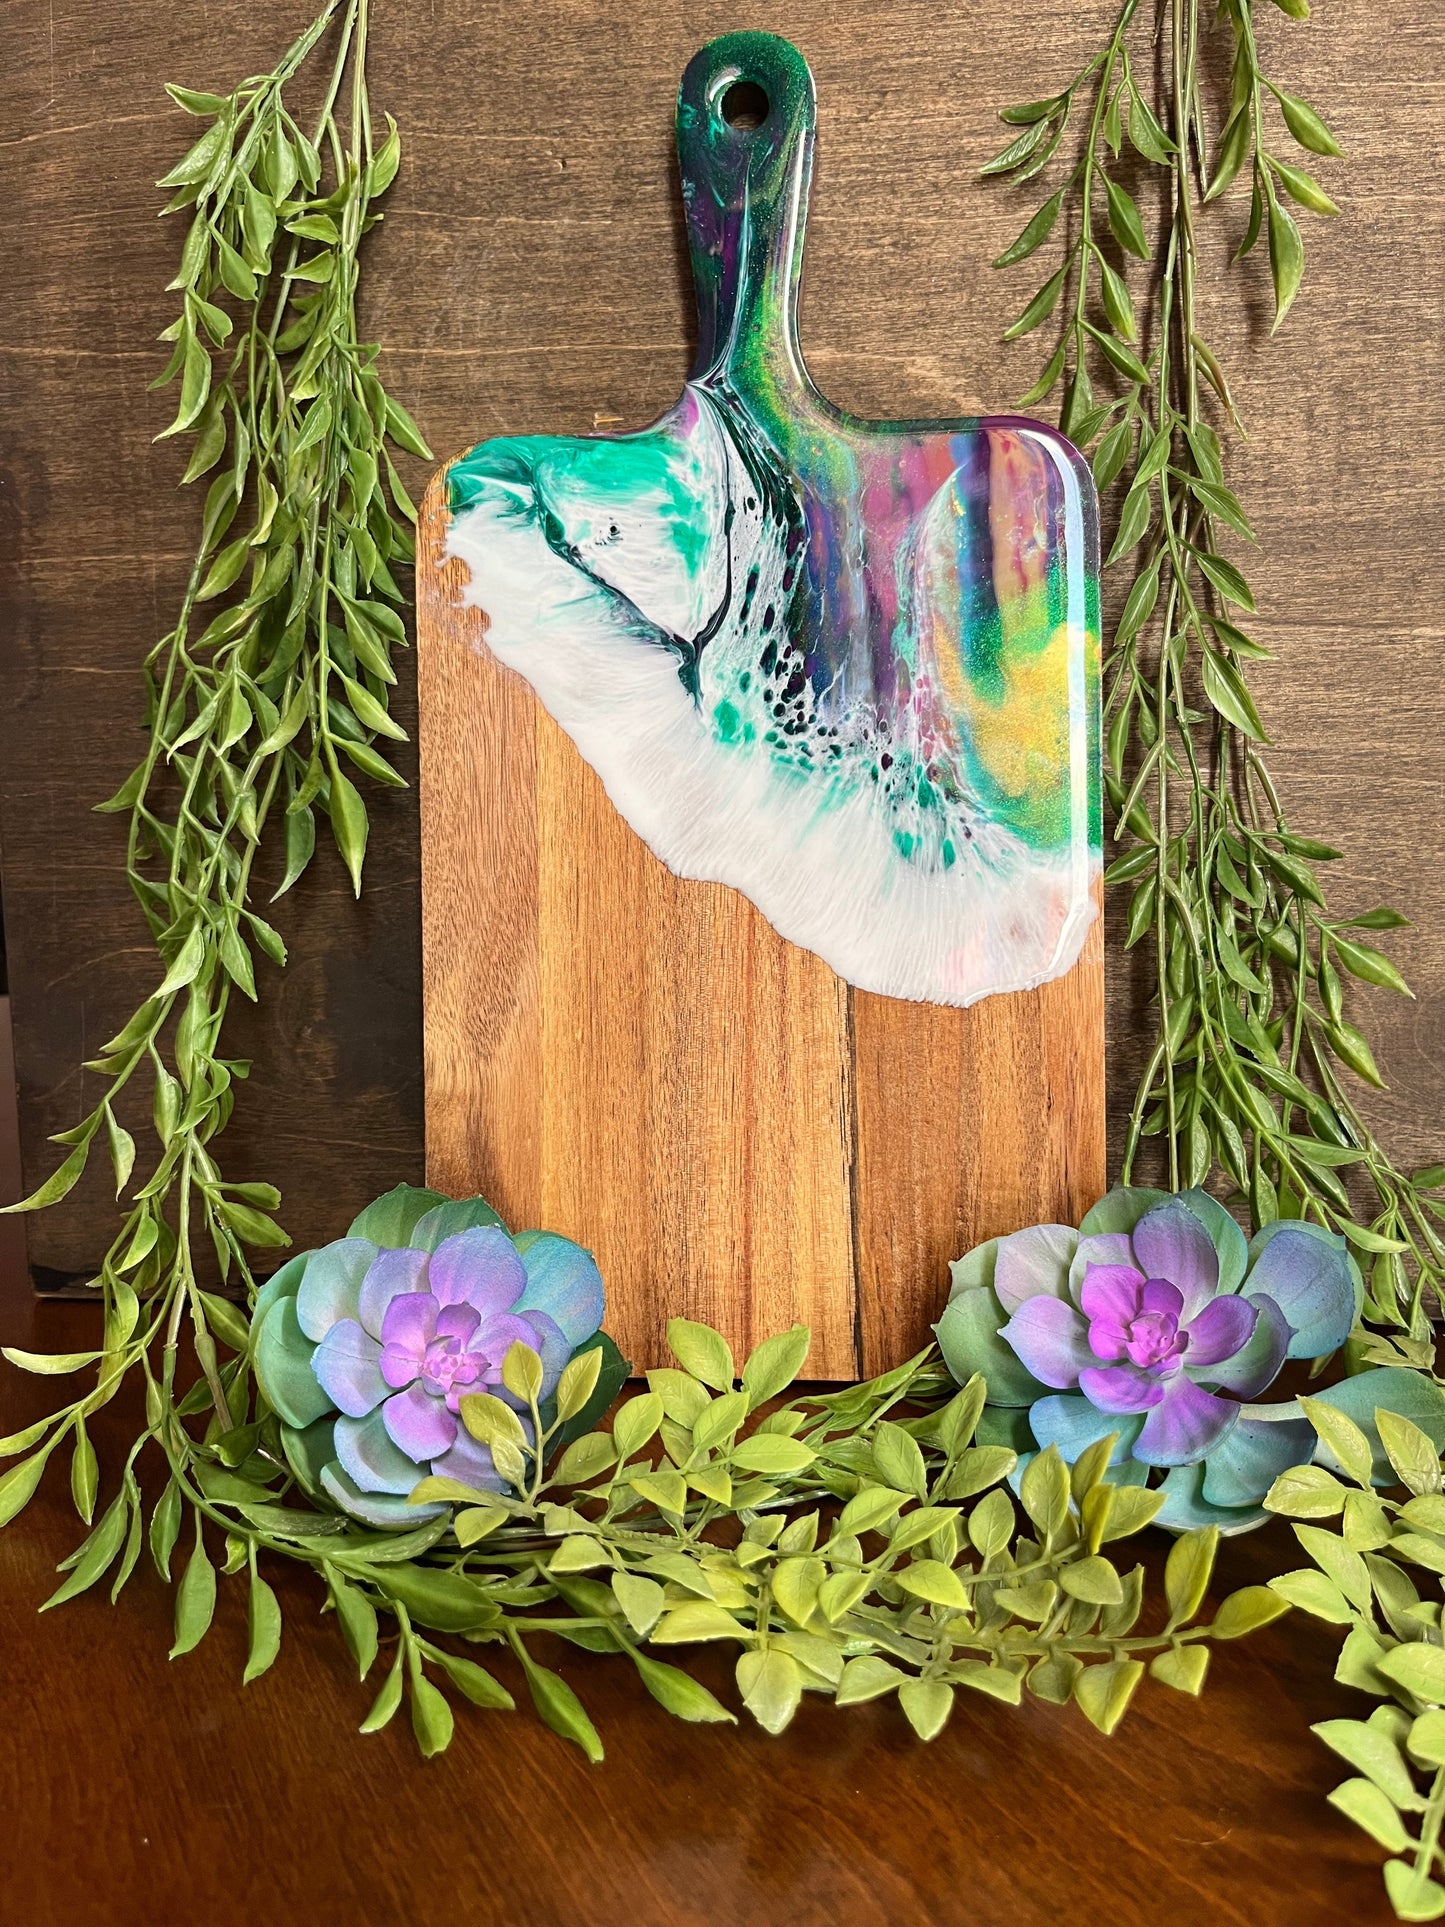 PRIVATE LISTING - Resin Class - Personal size Cutting board - 8/26 @ 1pm (Copy)